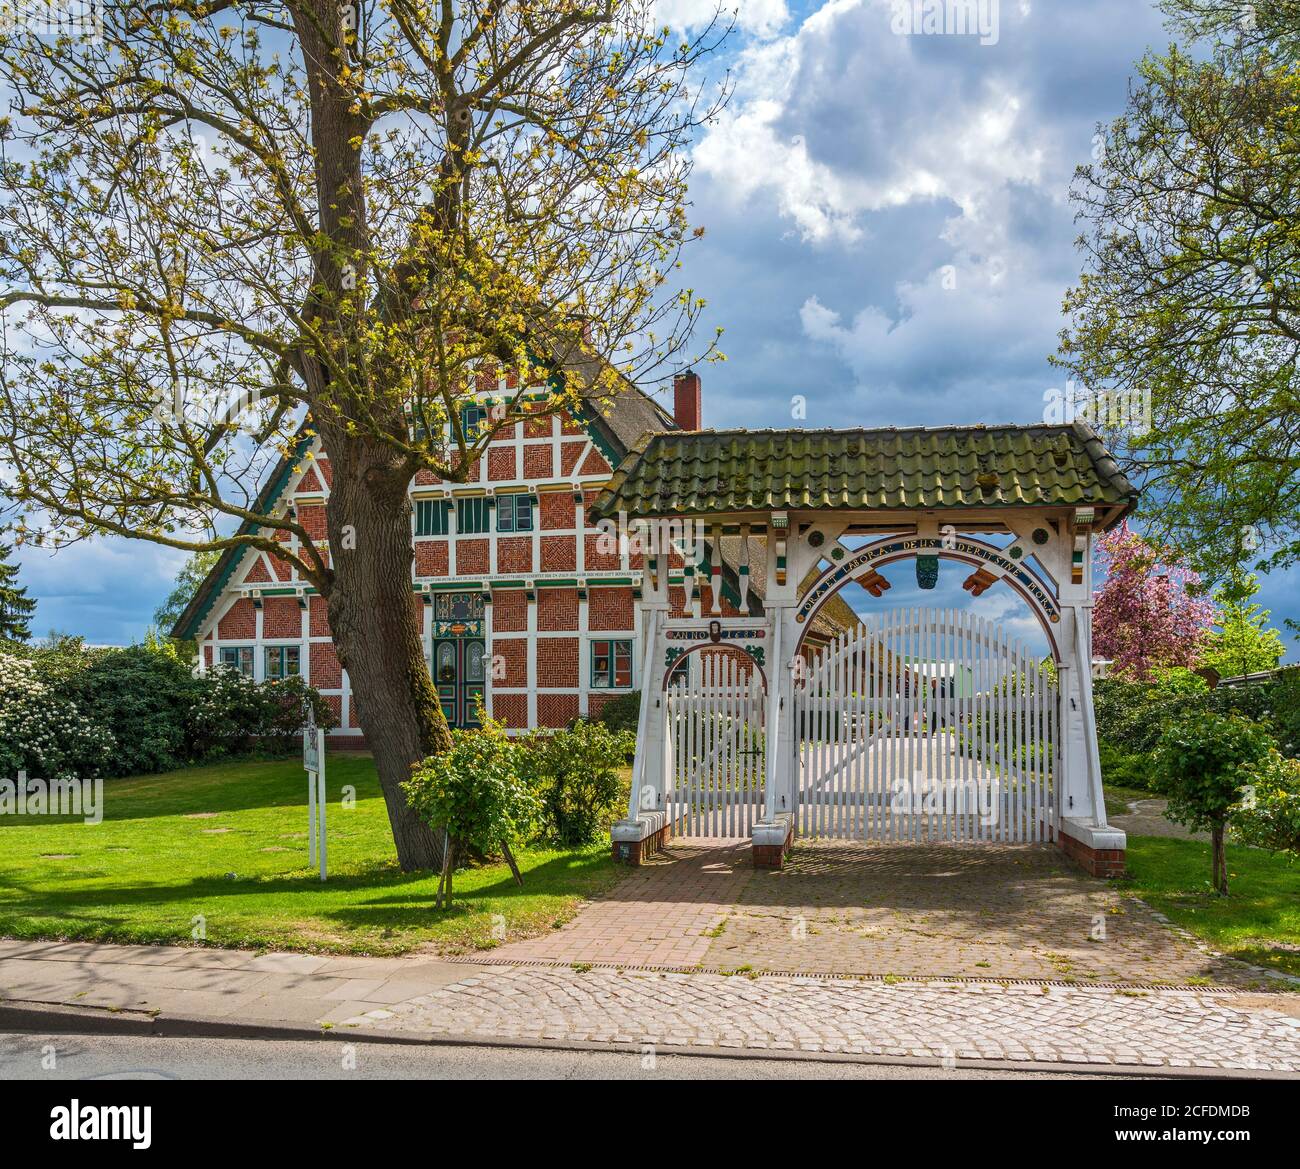 Germany, Hamburg - Neuenfelde, ceremonial gate in front of farmhouse on Nincoper Strasse In the Altes Land, Café Obsthof PuurtenQuast Stock Photo